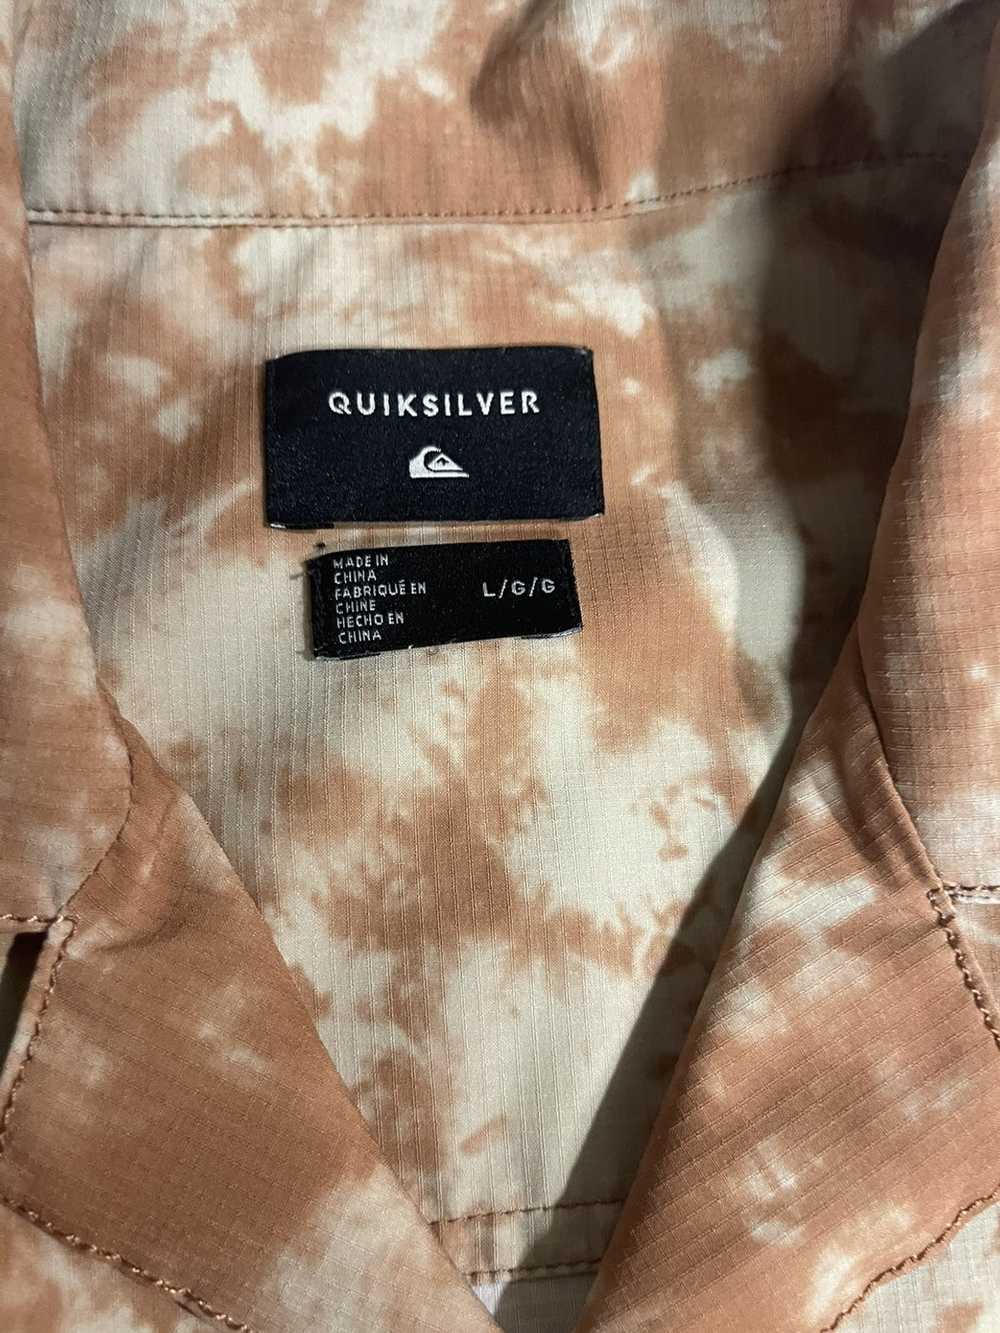 Quiksilver Quicksilver Top And Bottom Set - image 3